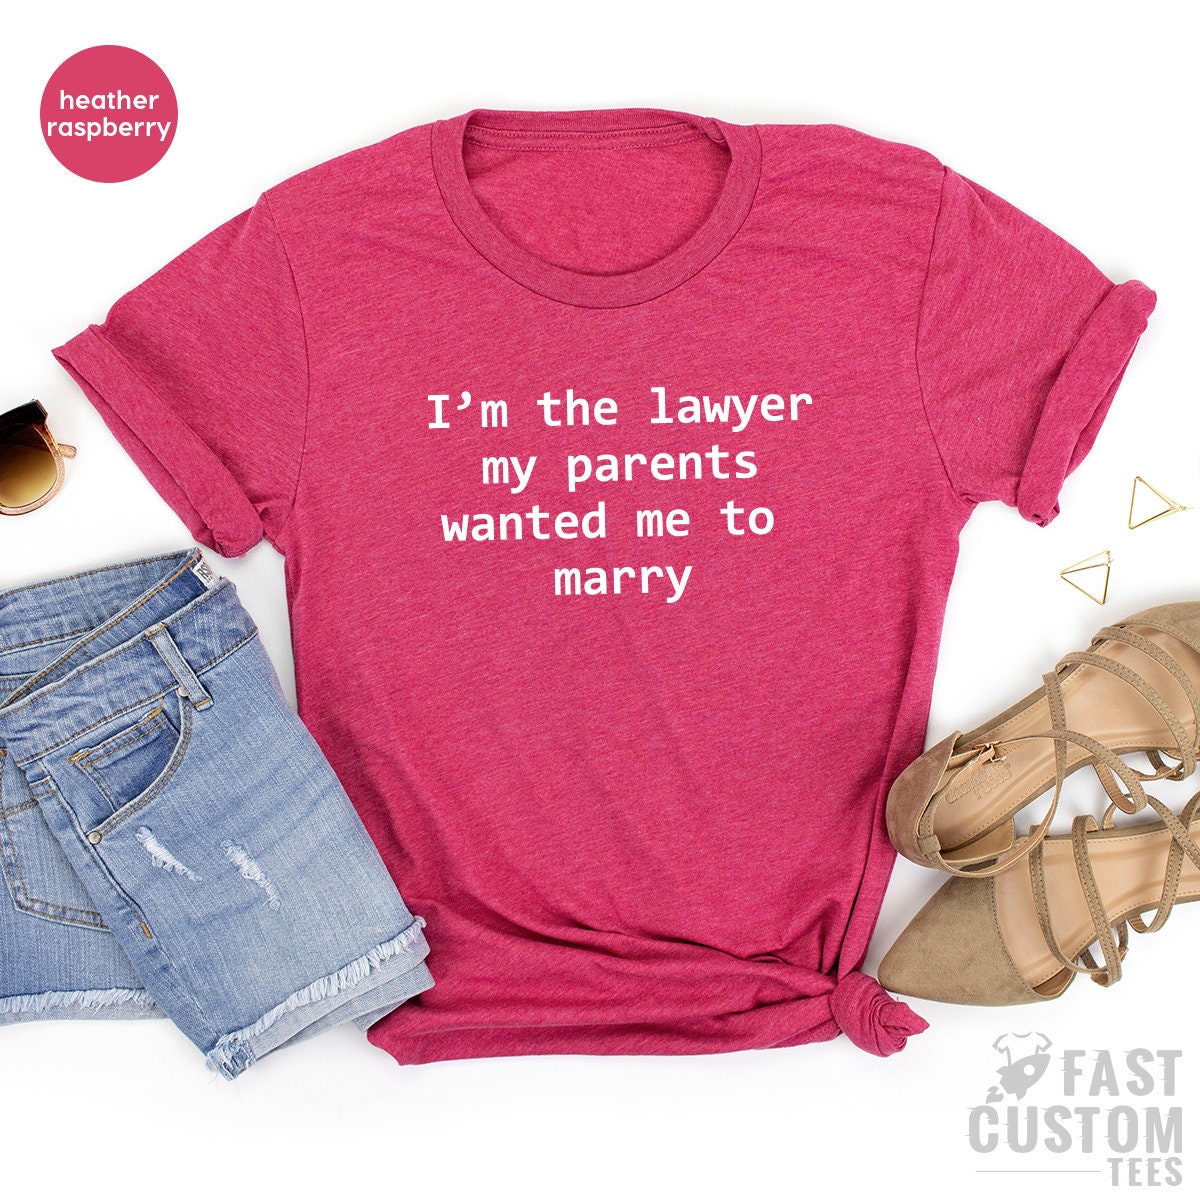 Funny Lawyer TShirt, Female Lawyer Shirt, Law Degree T Shirt, Gift For Lawyer, Law Student Shirt, I'm A Lawyer, Law Graduation Shirt - Fastdeliverytees.com